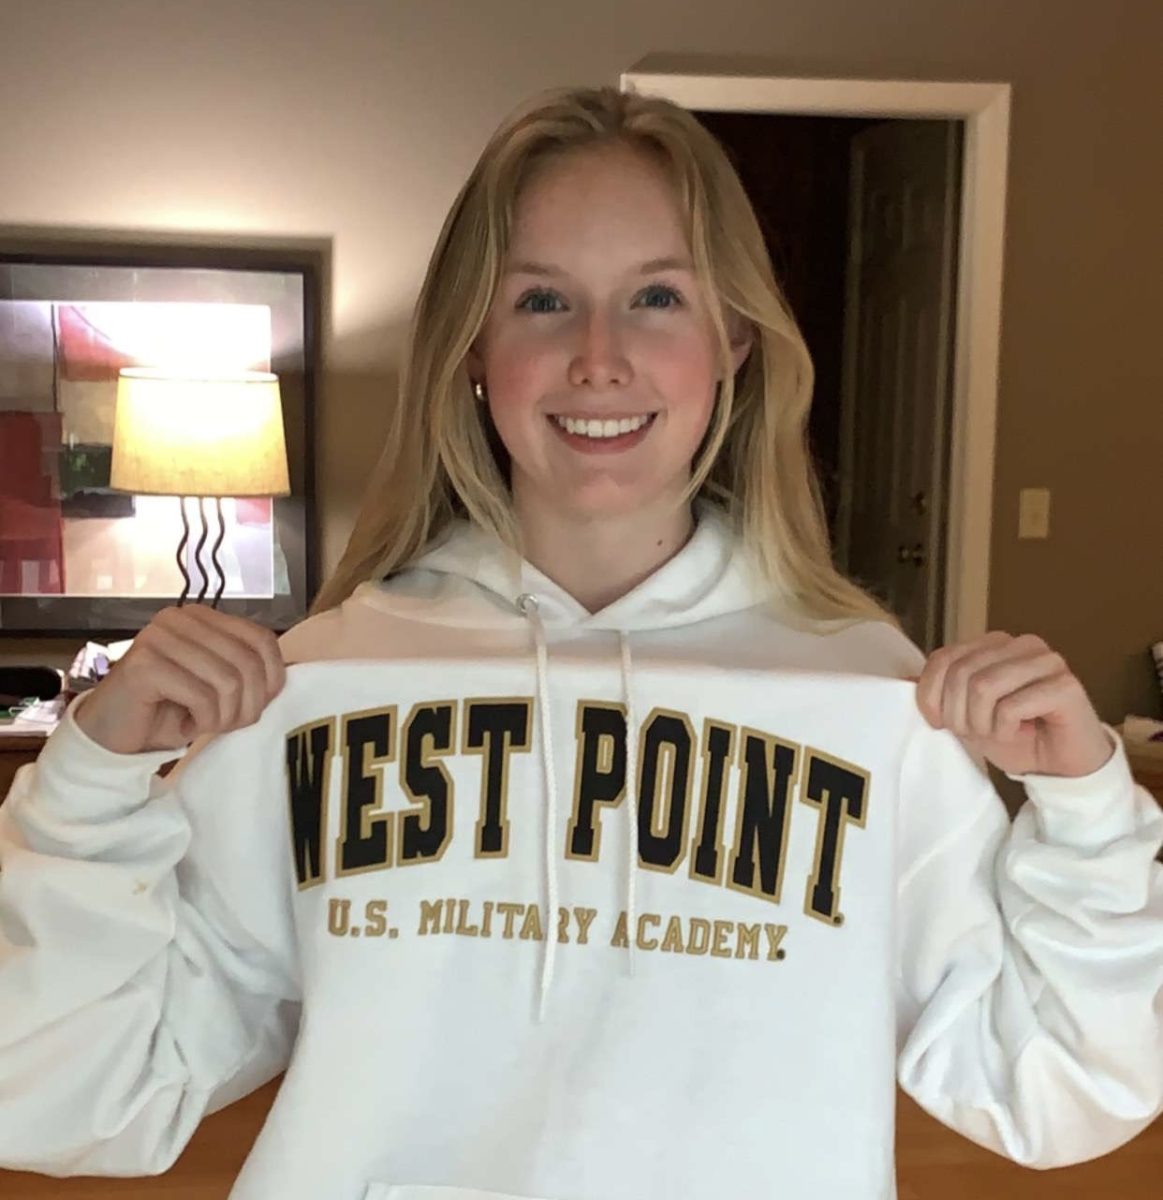 Senior Siena Carver is committed to West Point and is currently getting ready for boot camp.